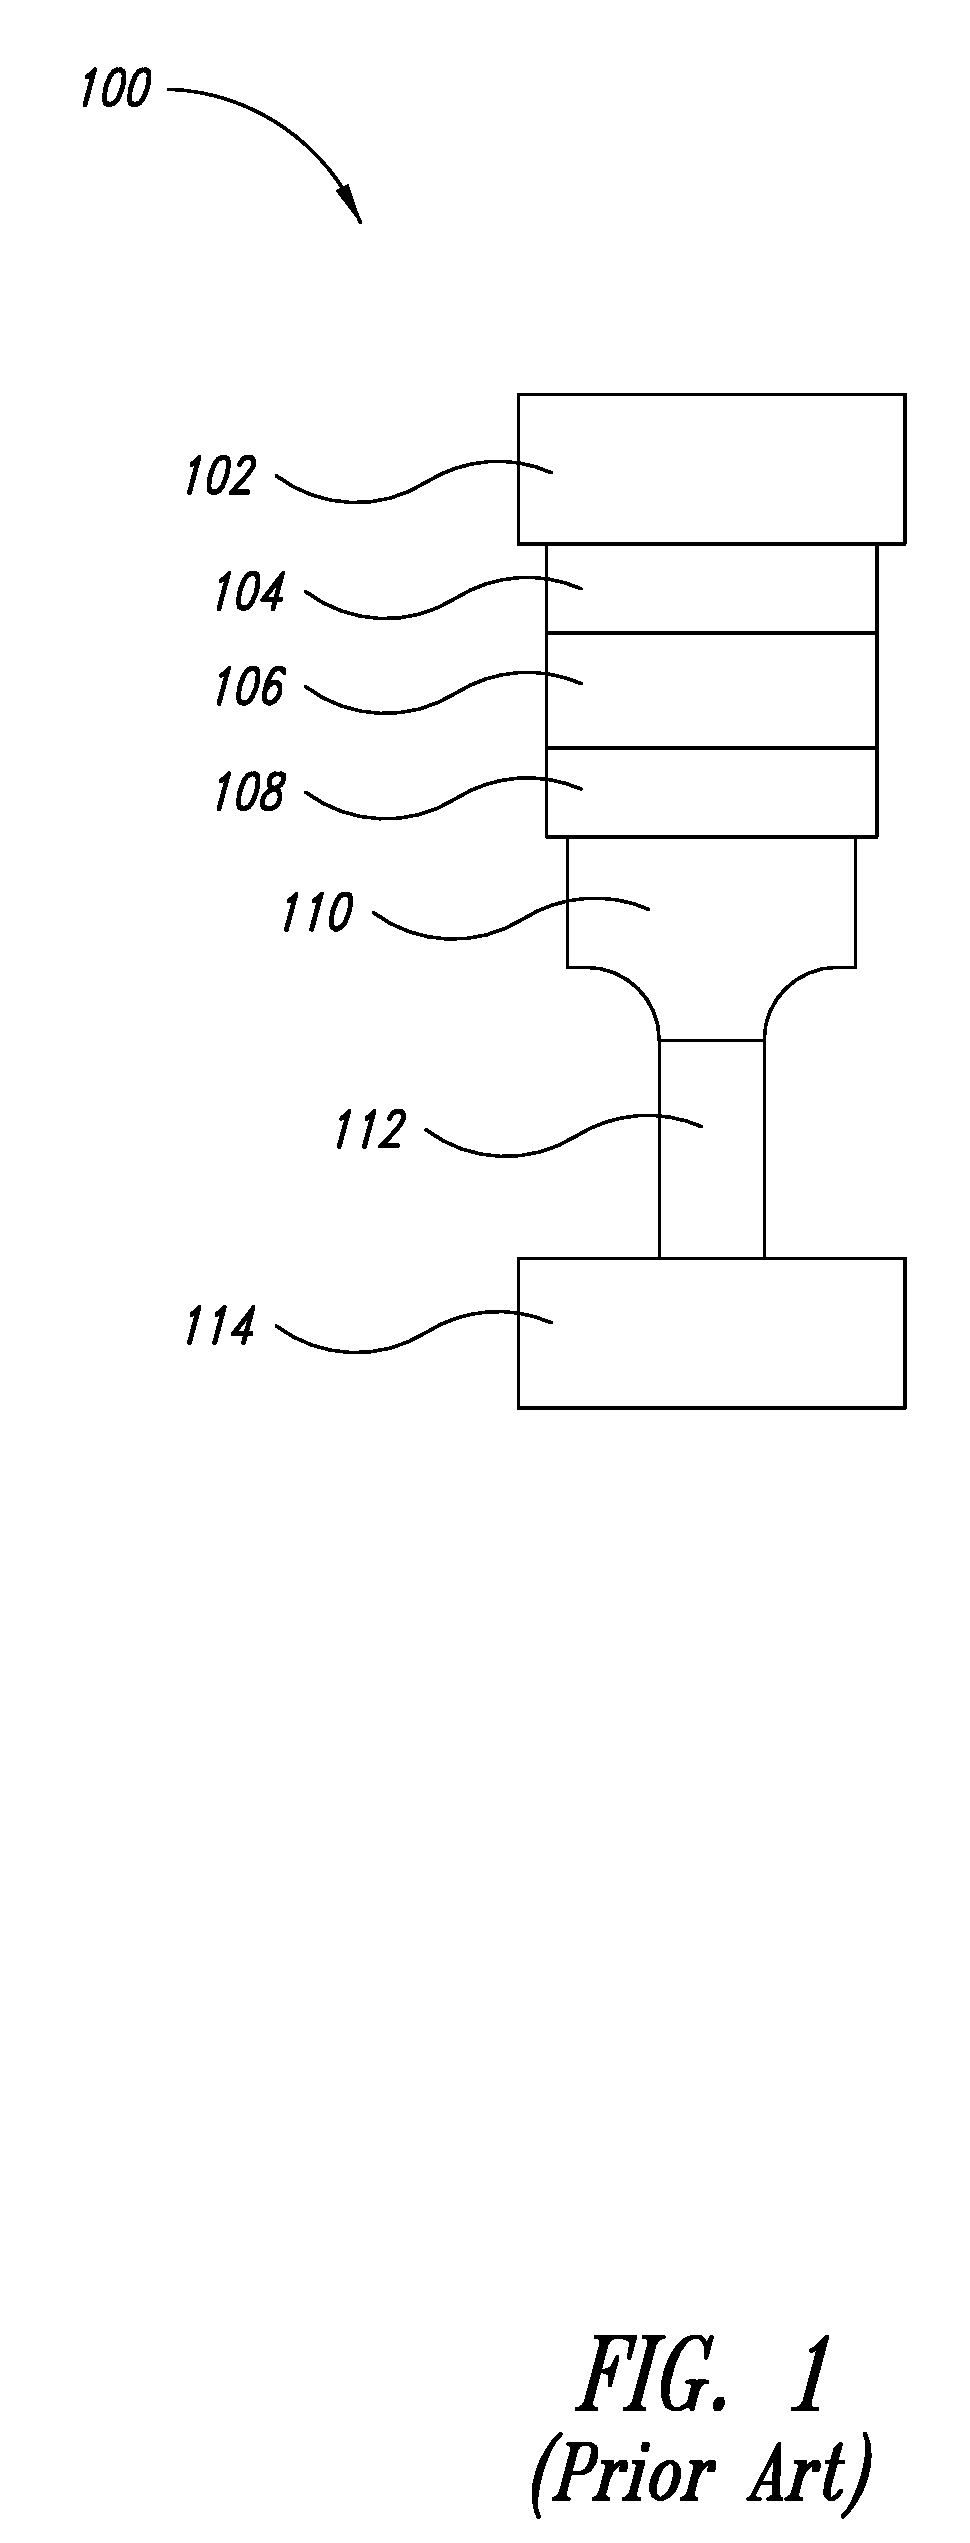 Self-heating phase change memory cell architecture